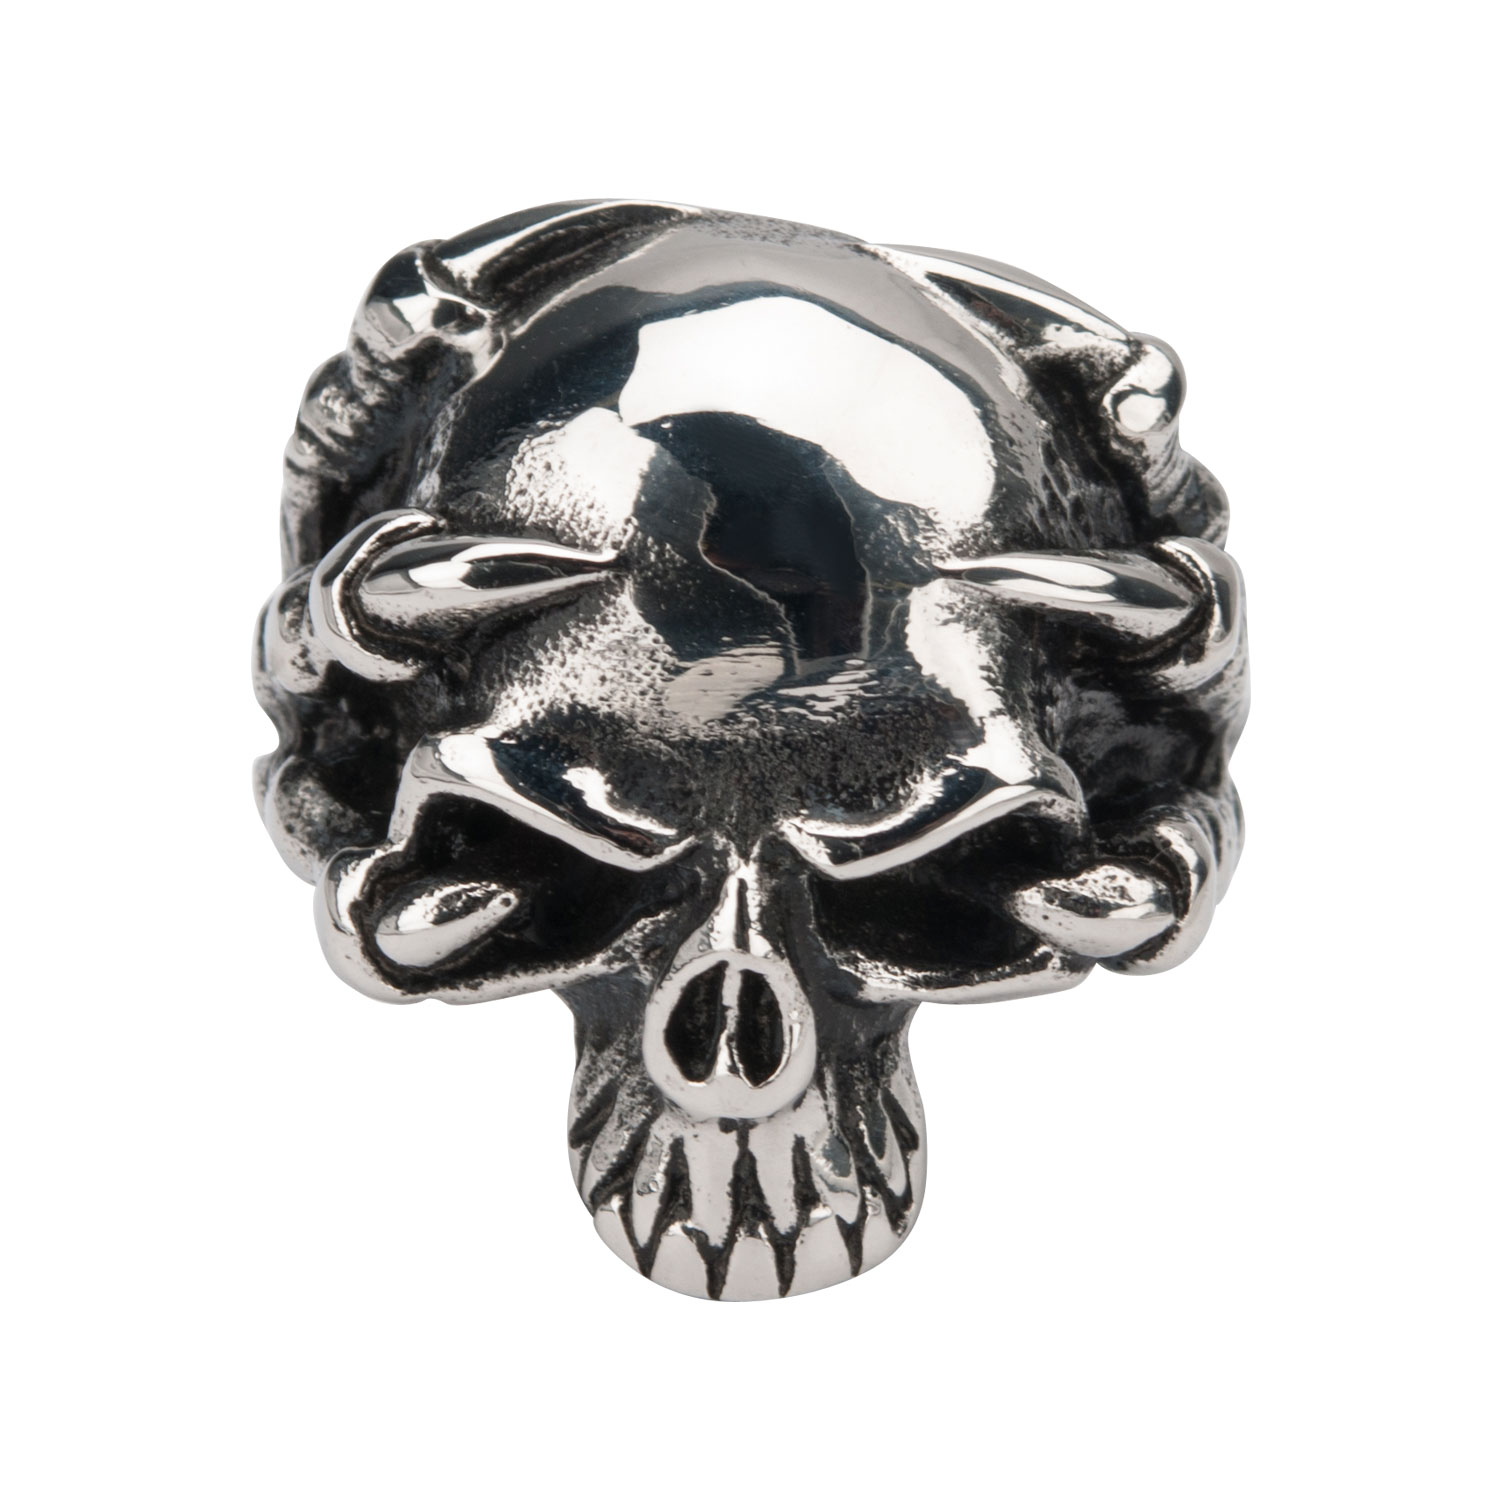 Black Oxidized Skull Ring with Claws Image 2 P.K. Bennett Jewelers Mundelein, IL